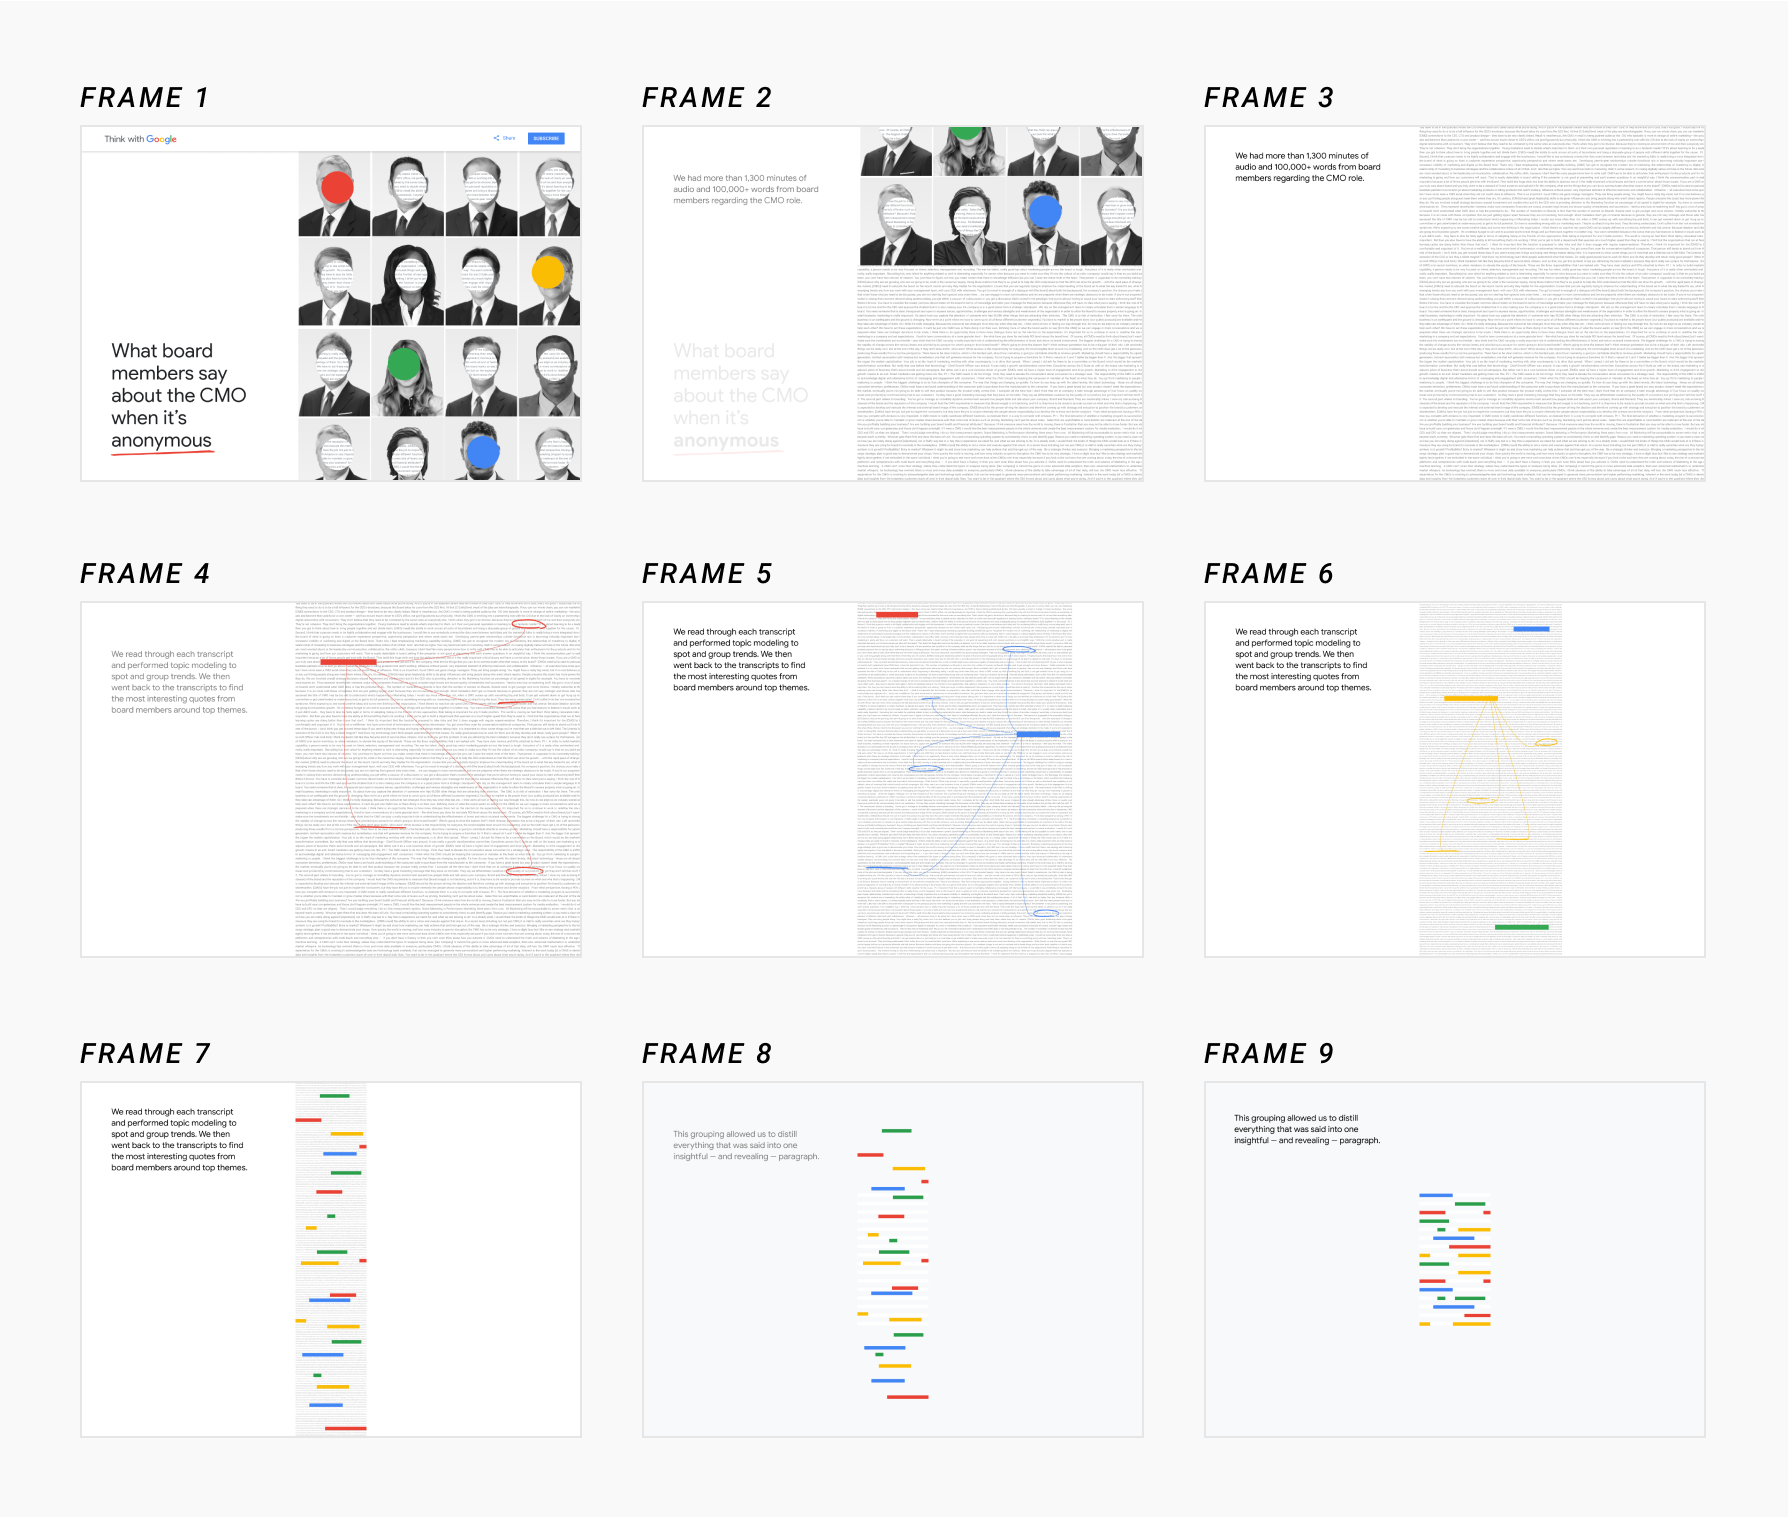 For the interactive about CMOs, I used this frame-by-frame storyboard of the introductory animation to collaborate with the project's developer.